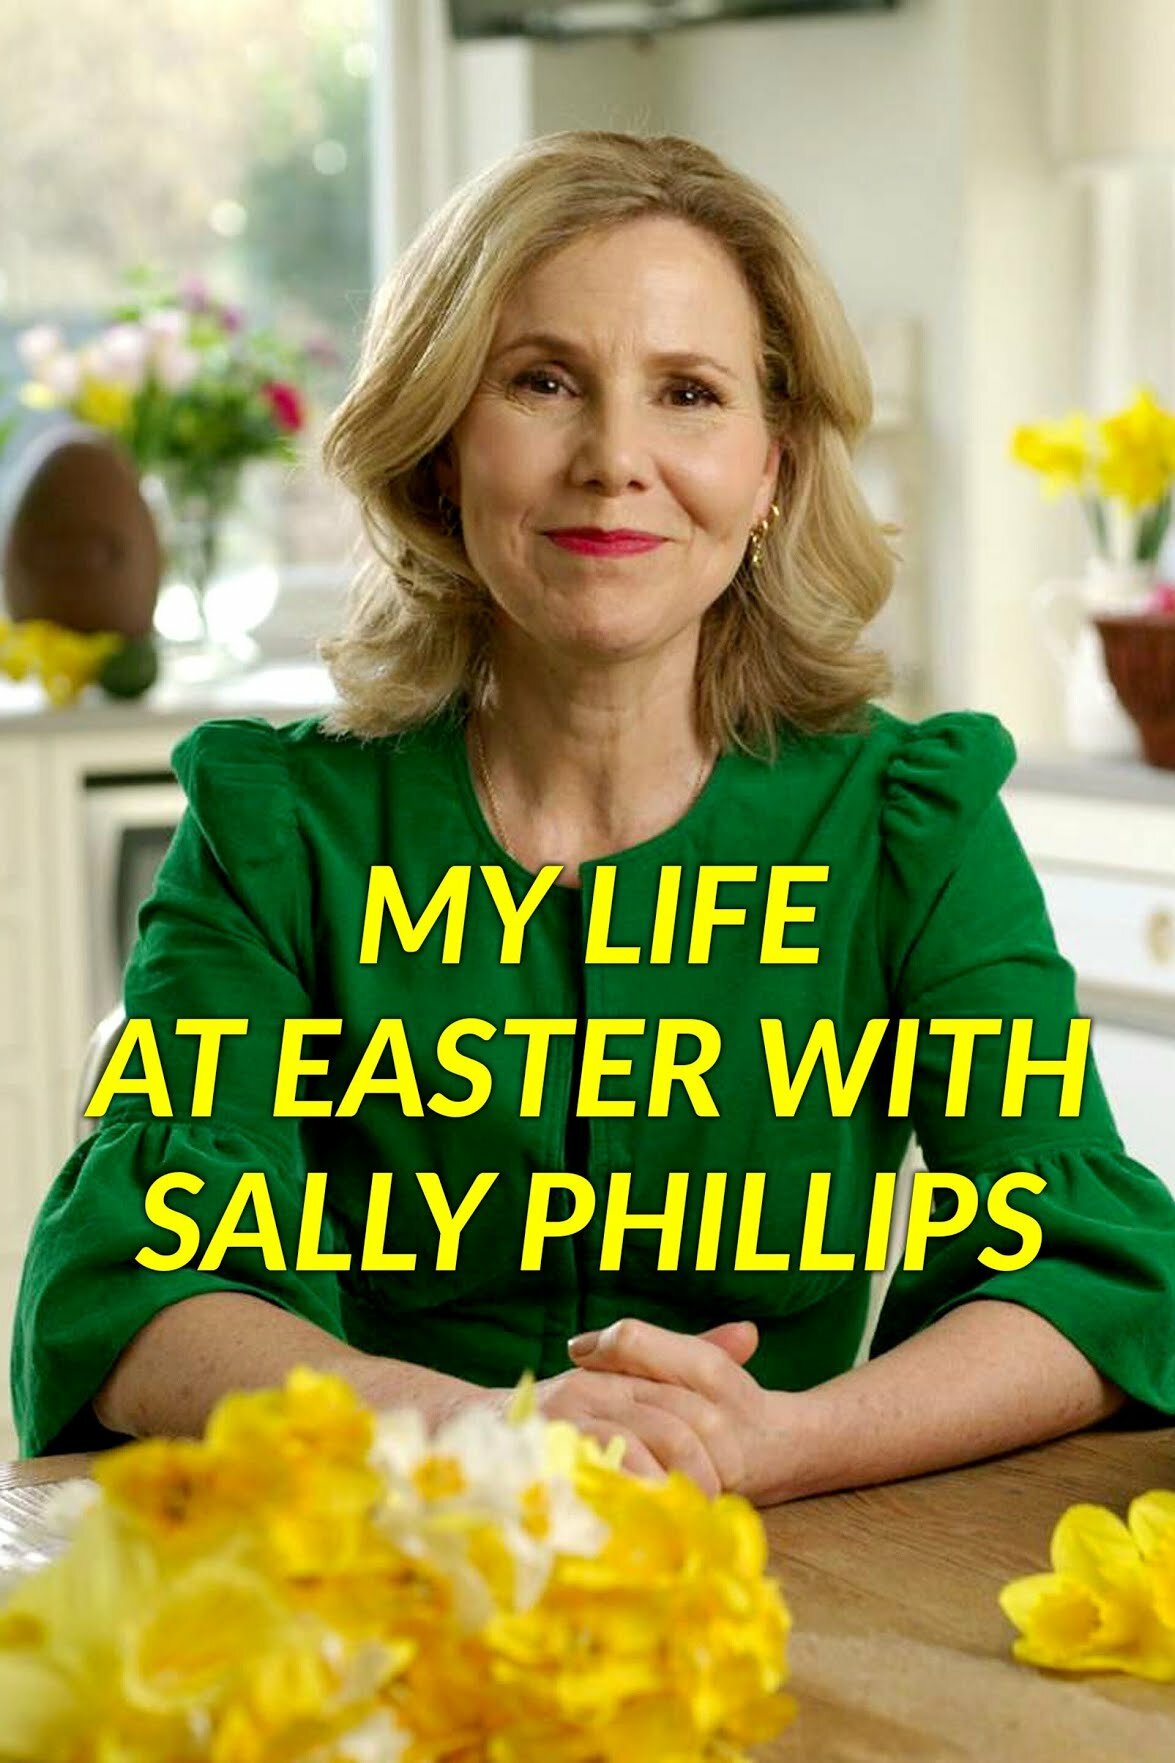 My Life at Easter with Sally Phillips ne zaman